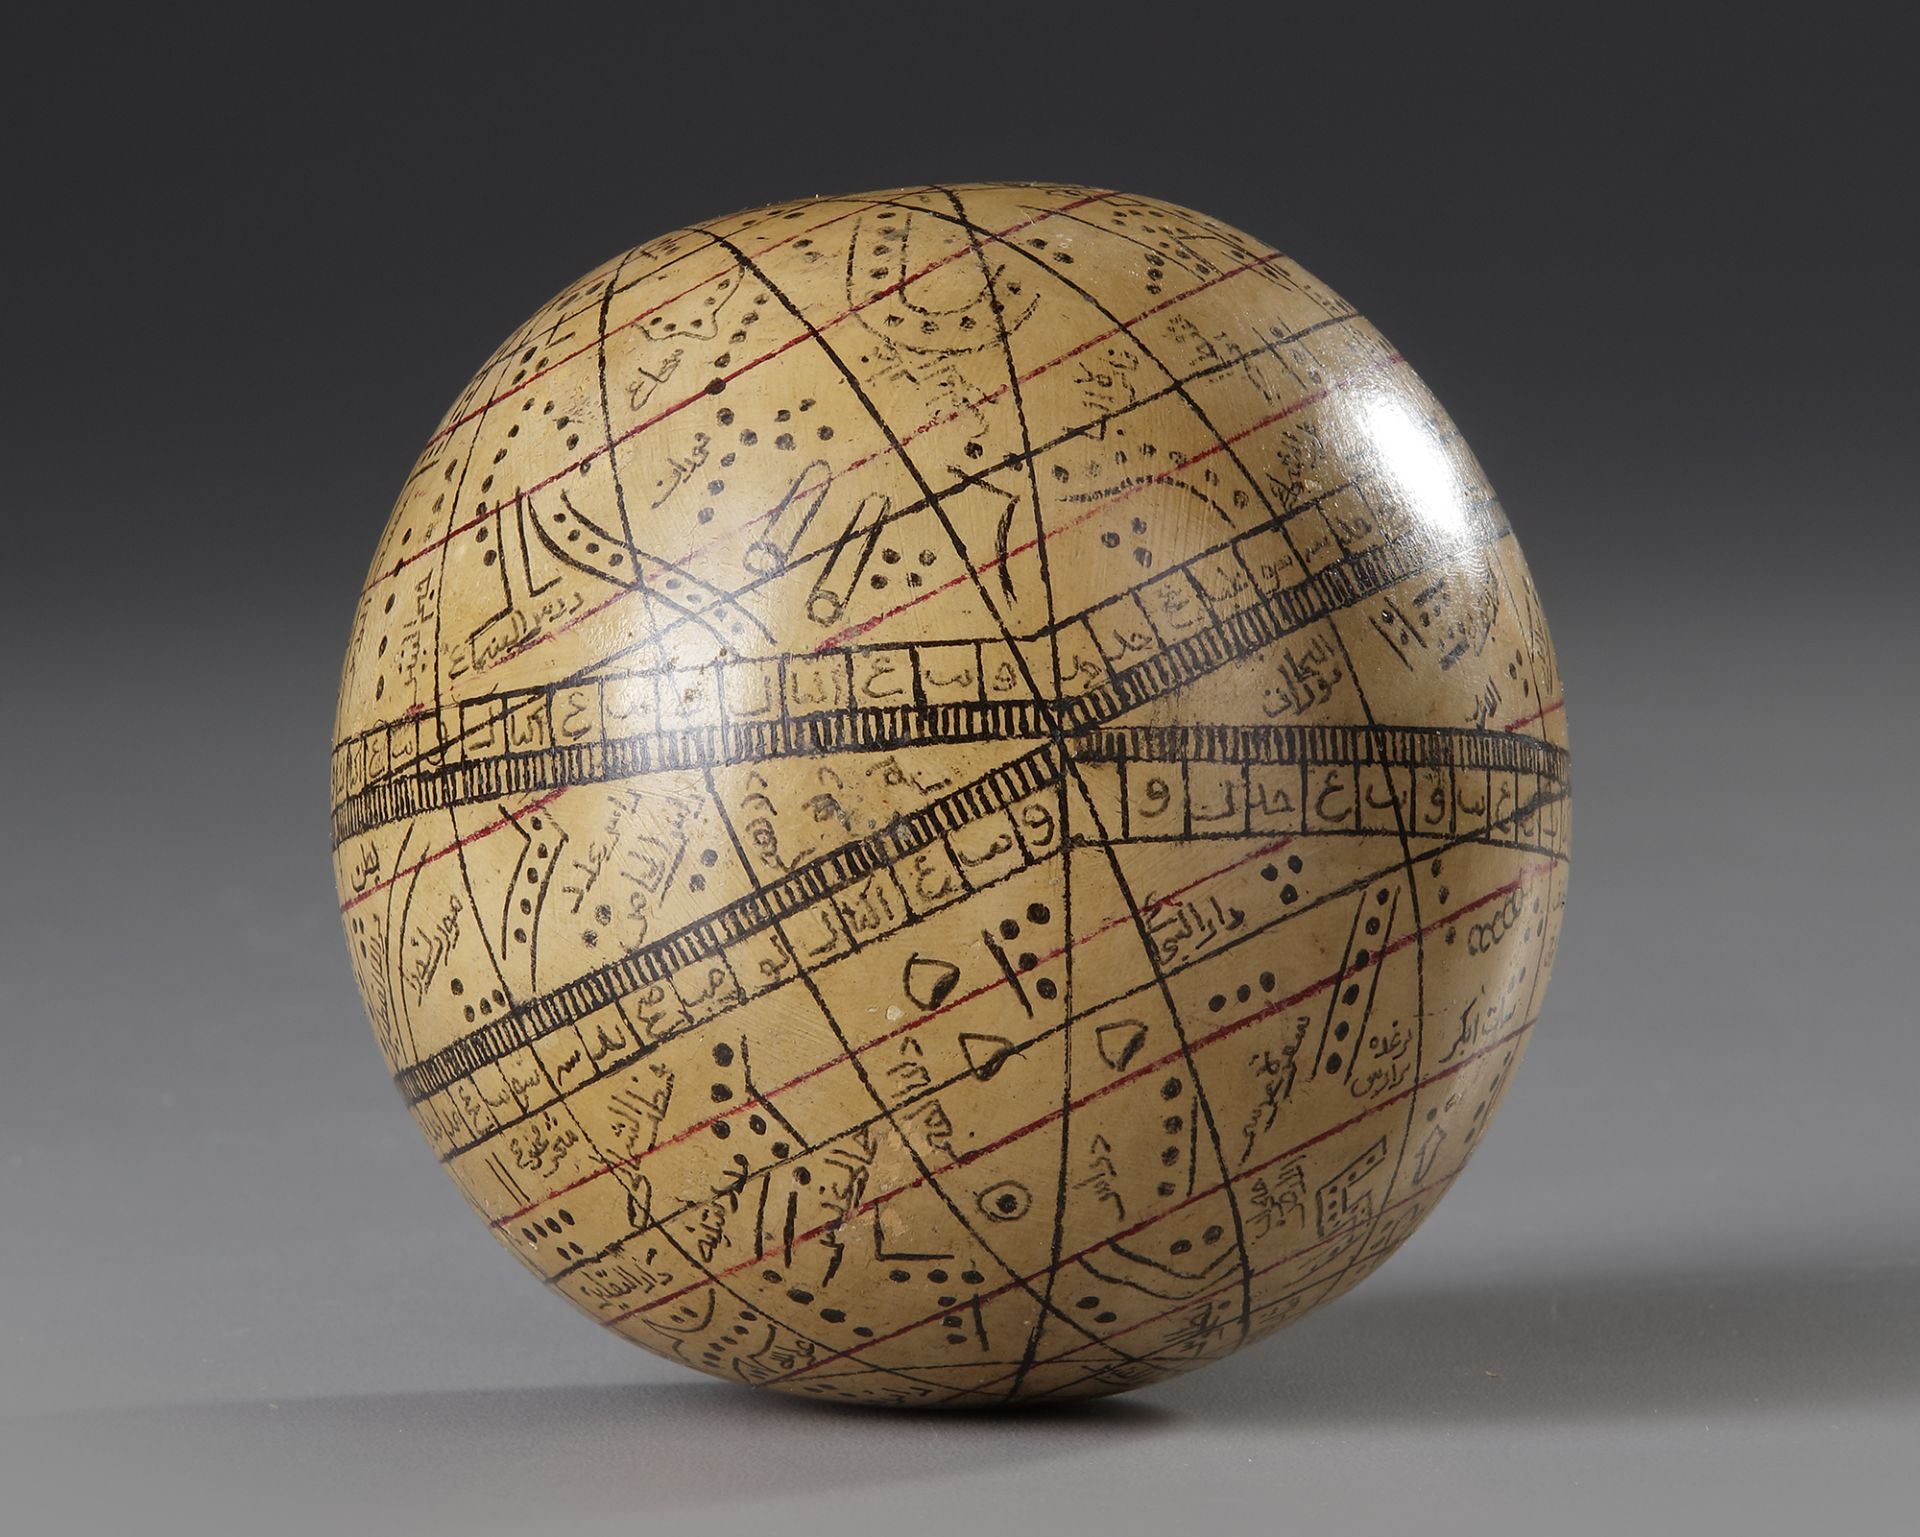 A SPHERICAL ASTROLABE, 19TH/ 20TH CENTURY - Image 4 of 5